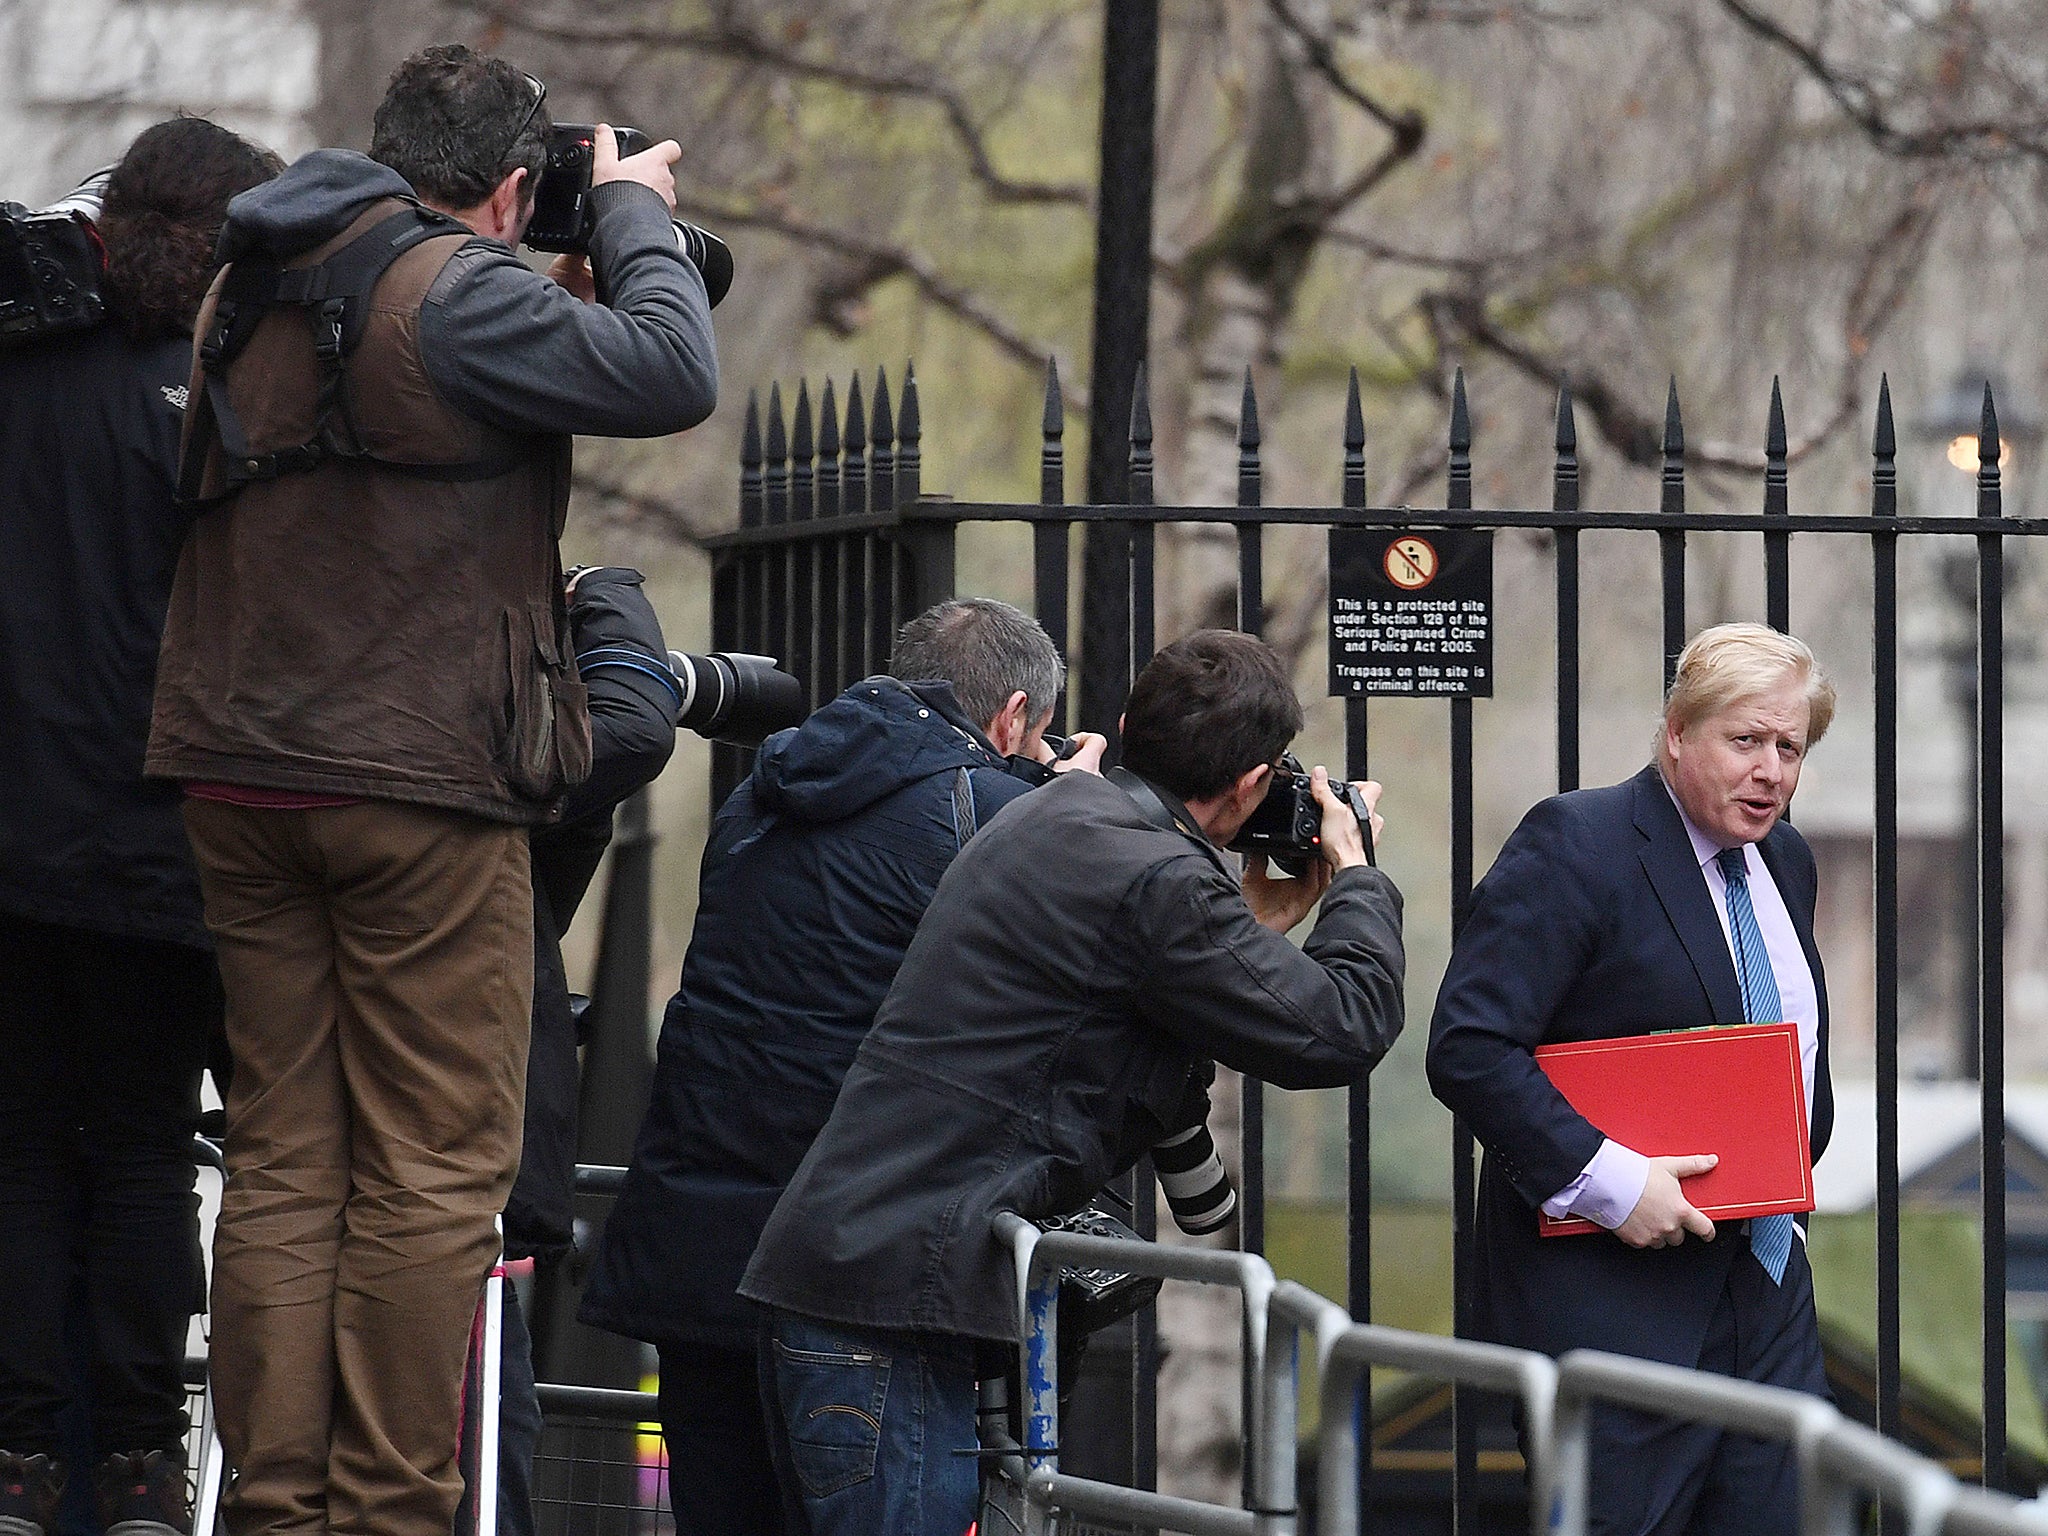 Foreign Secretary Boris Johnson arriving at 10 Downing Street, London for the weekly cabinet meeting